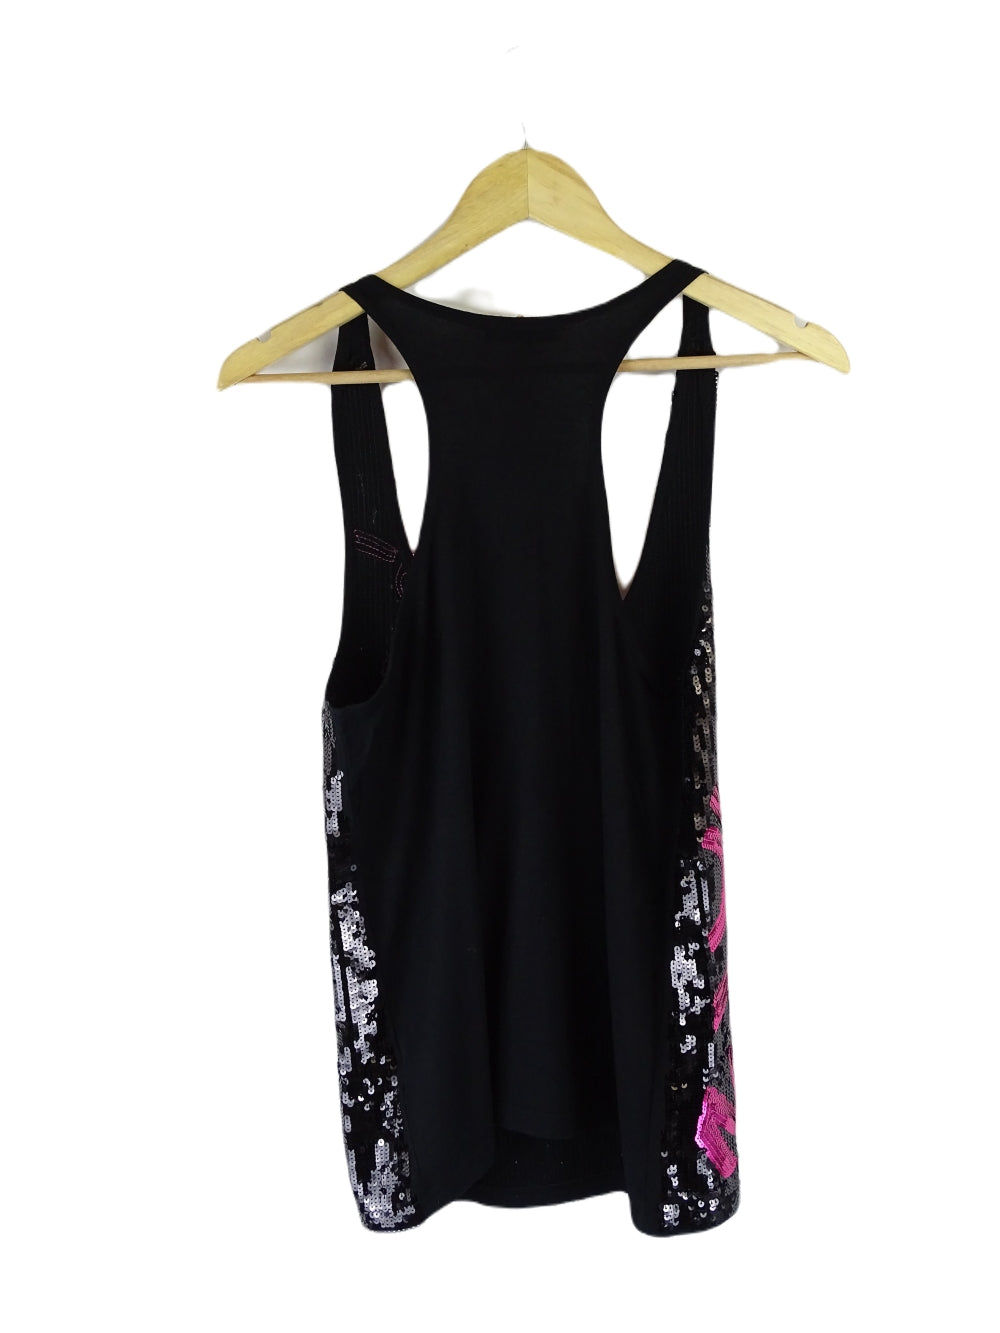 Y London Black And Pink Sequin Singlet 12